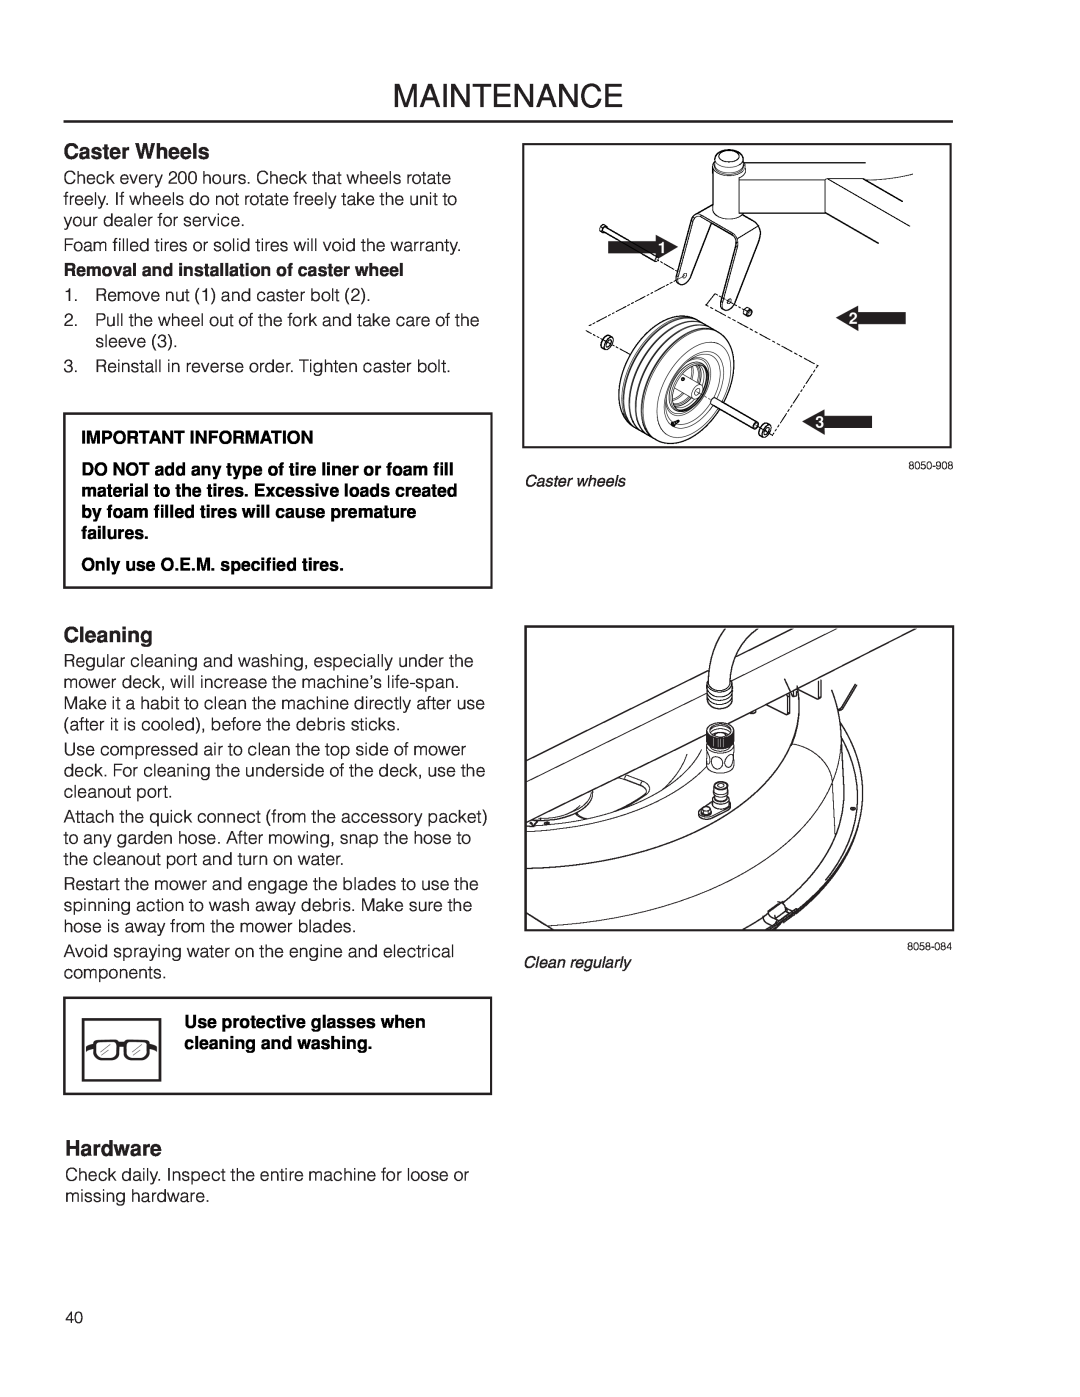 Husqvarna RZ3016 CA/966612302 Caster Wheels, Cleaning, Hardware, Removal and installation of caster wheel, Maintenance 